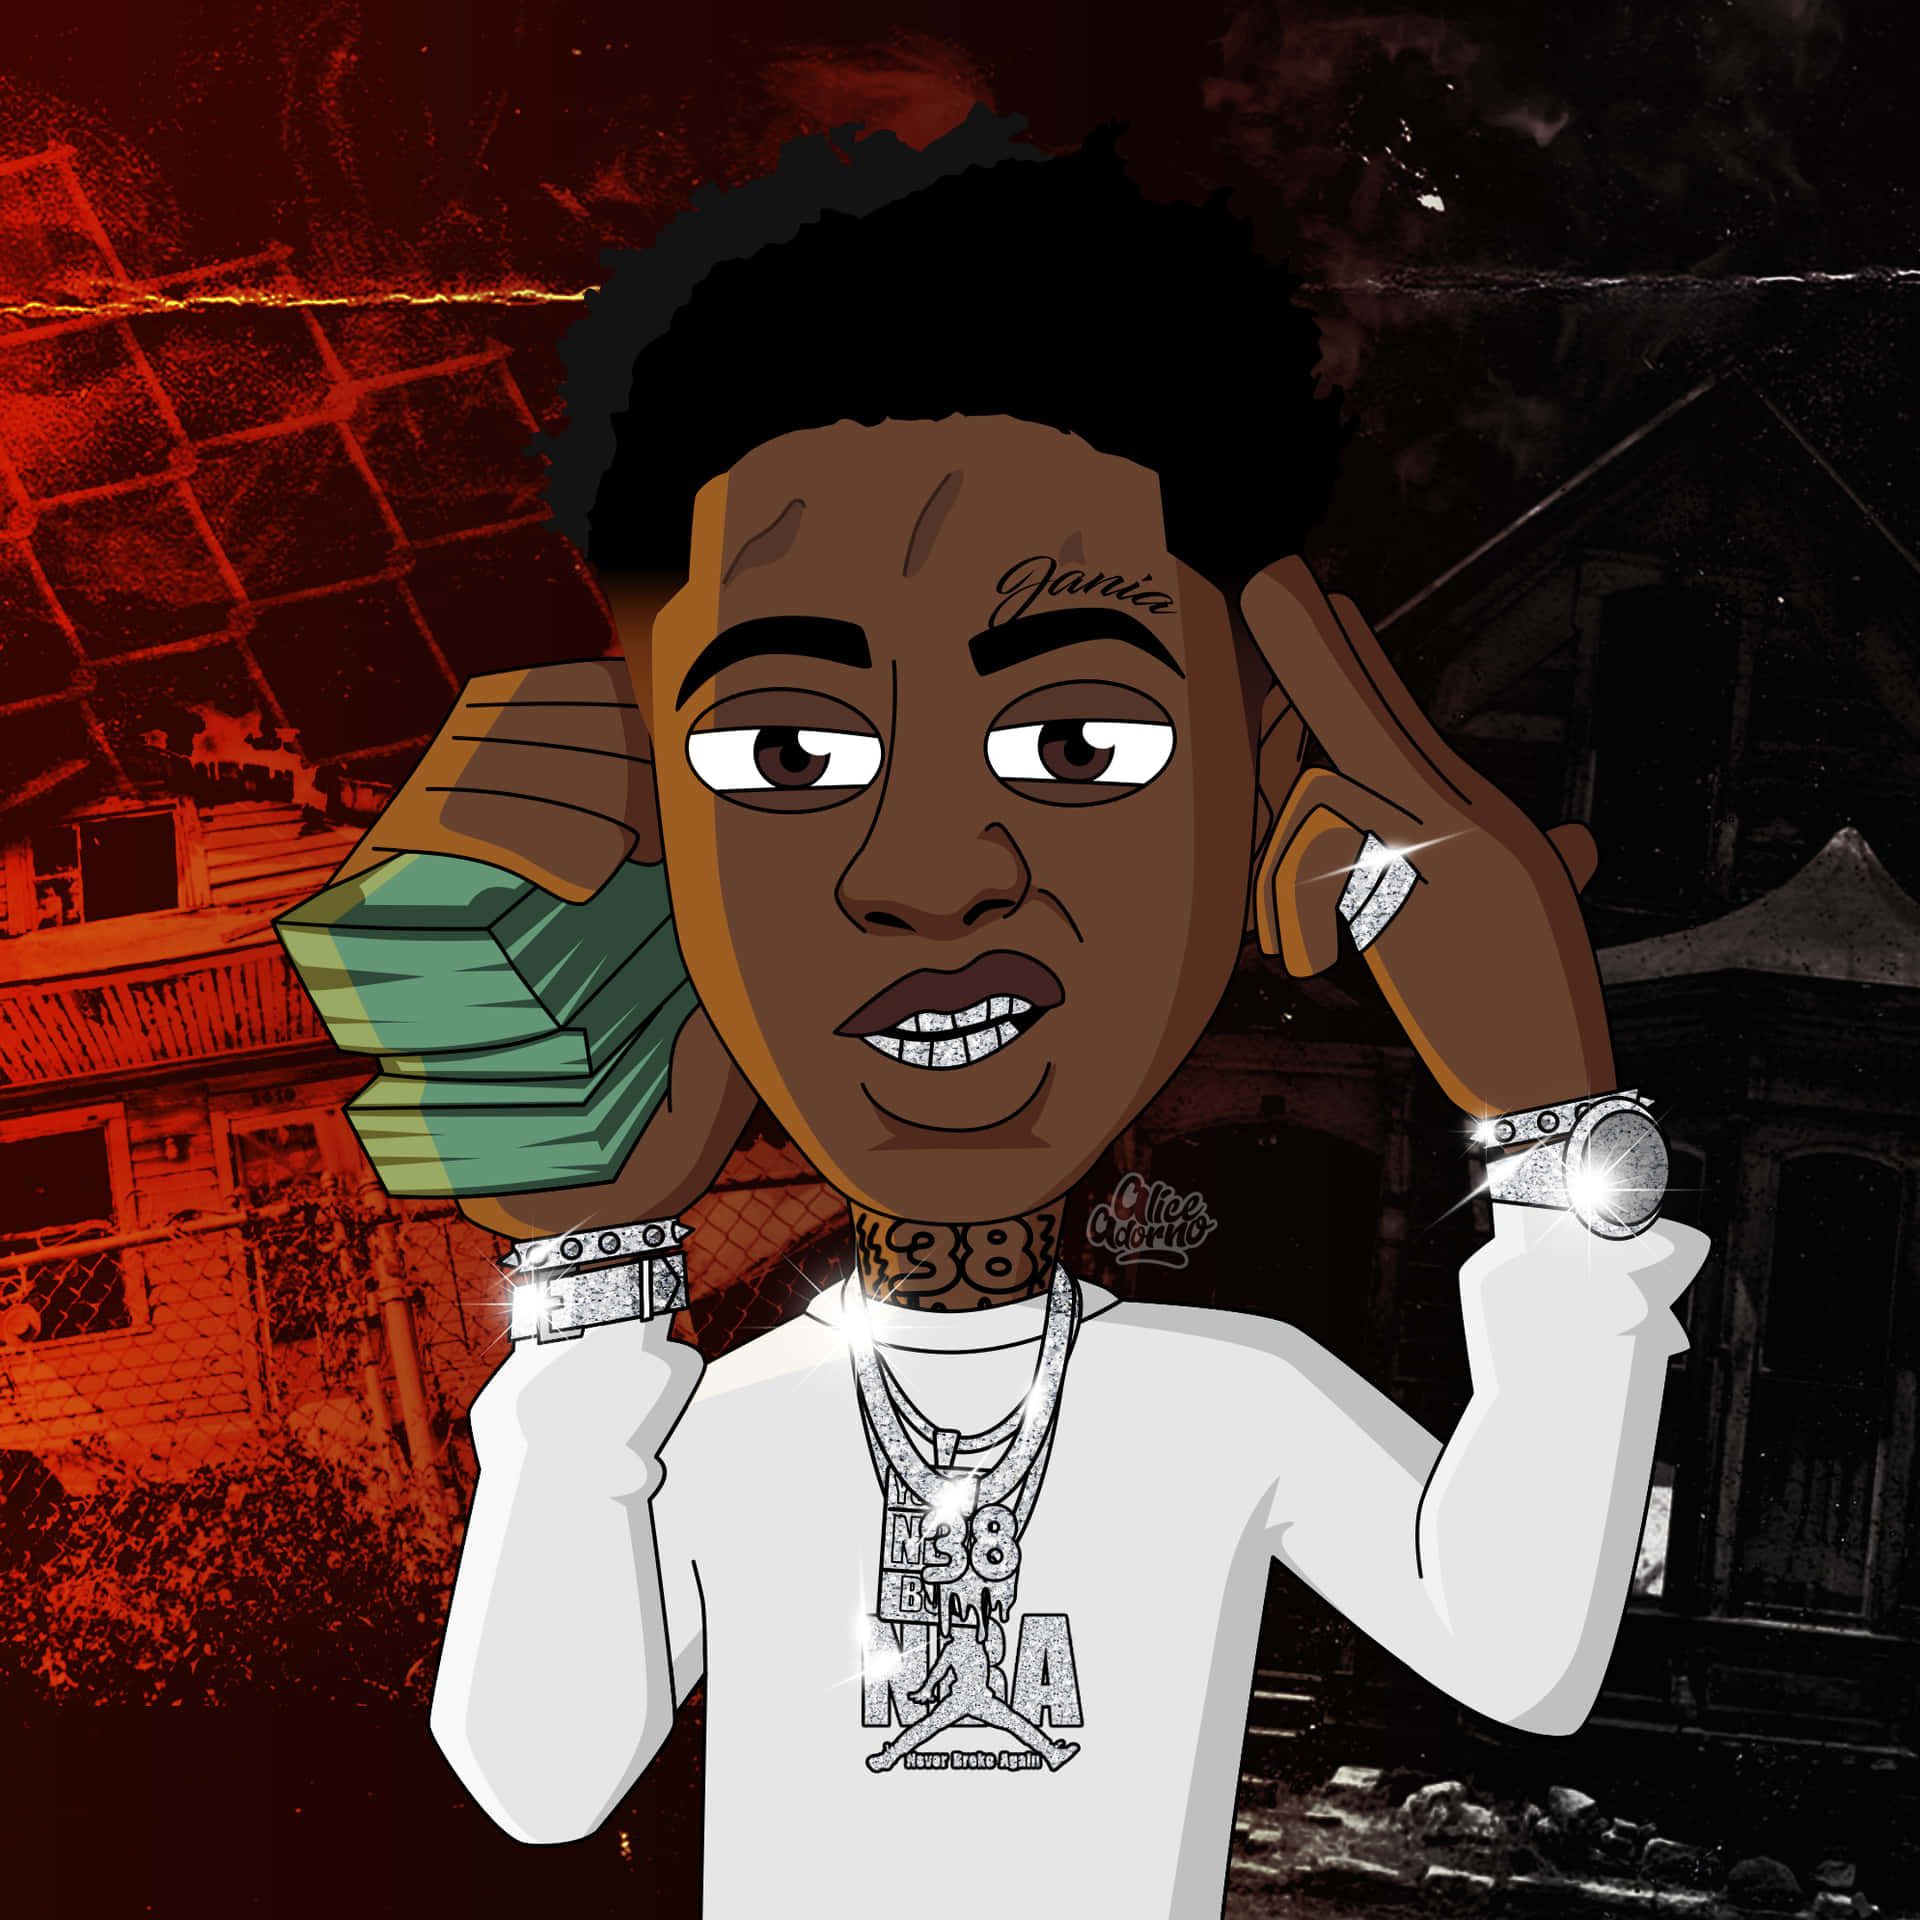 YoungBoy Never Broke Again is a rapper, singer and songwriter from Louisiana.